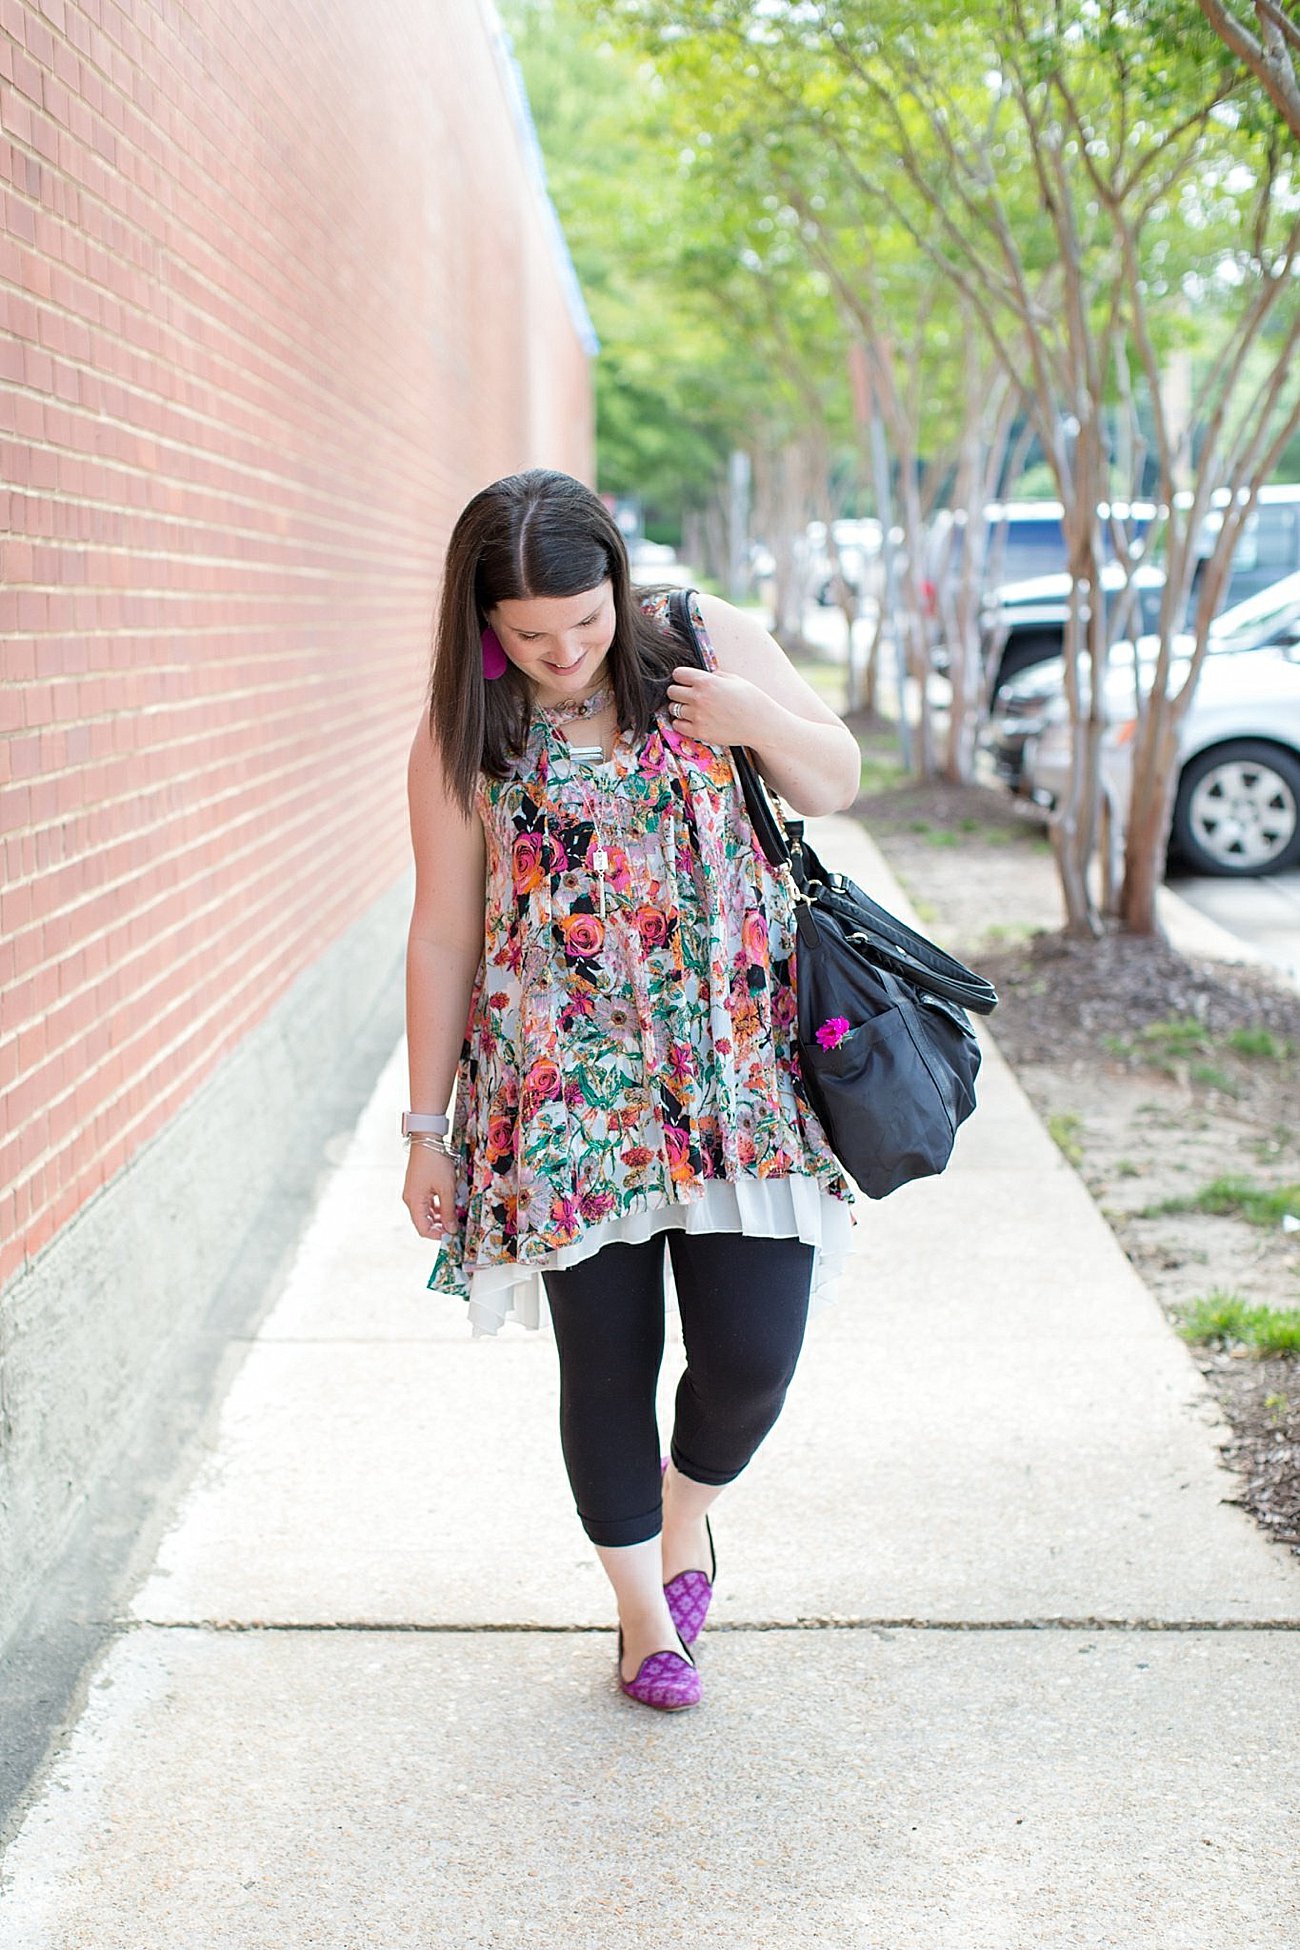 Grace & Lace floral tunic, chiffon lace extender, LulaRoe black leggings, Lily Jade diaper bag, Nickel and Suede earrings, The Root Collective "Millie" smoking shoes | North Carolina Fashion Blogger (8)